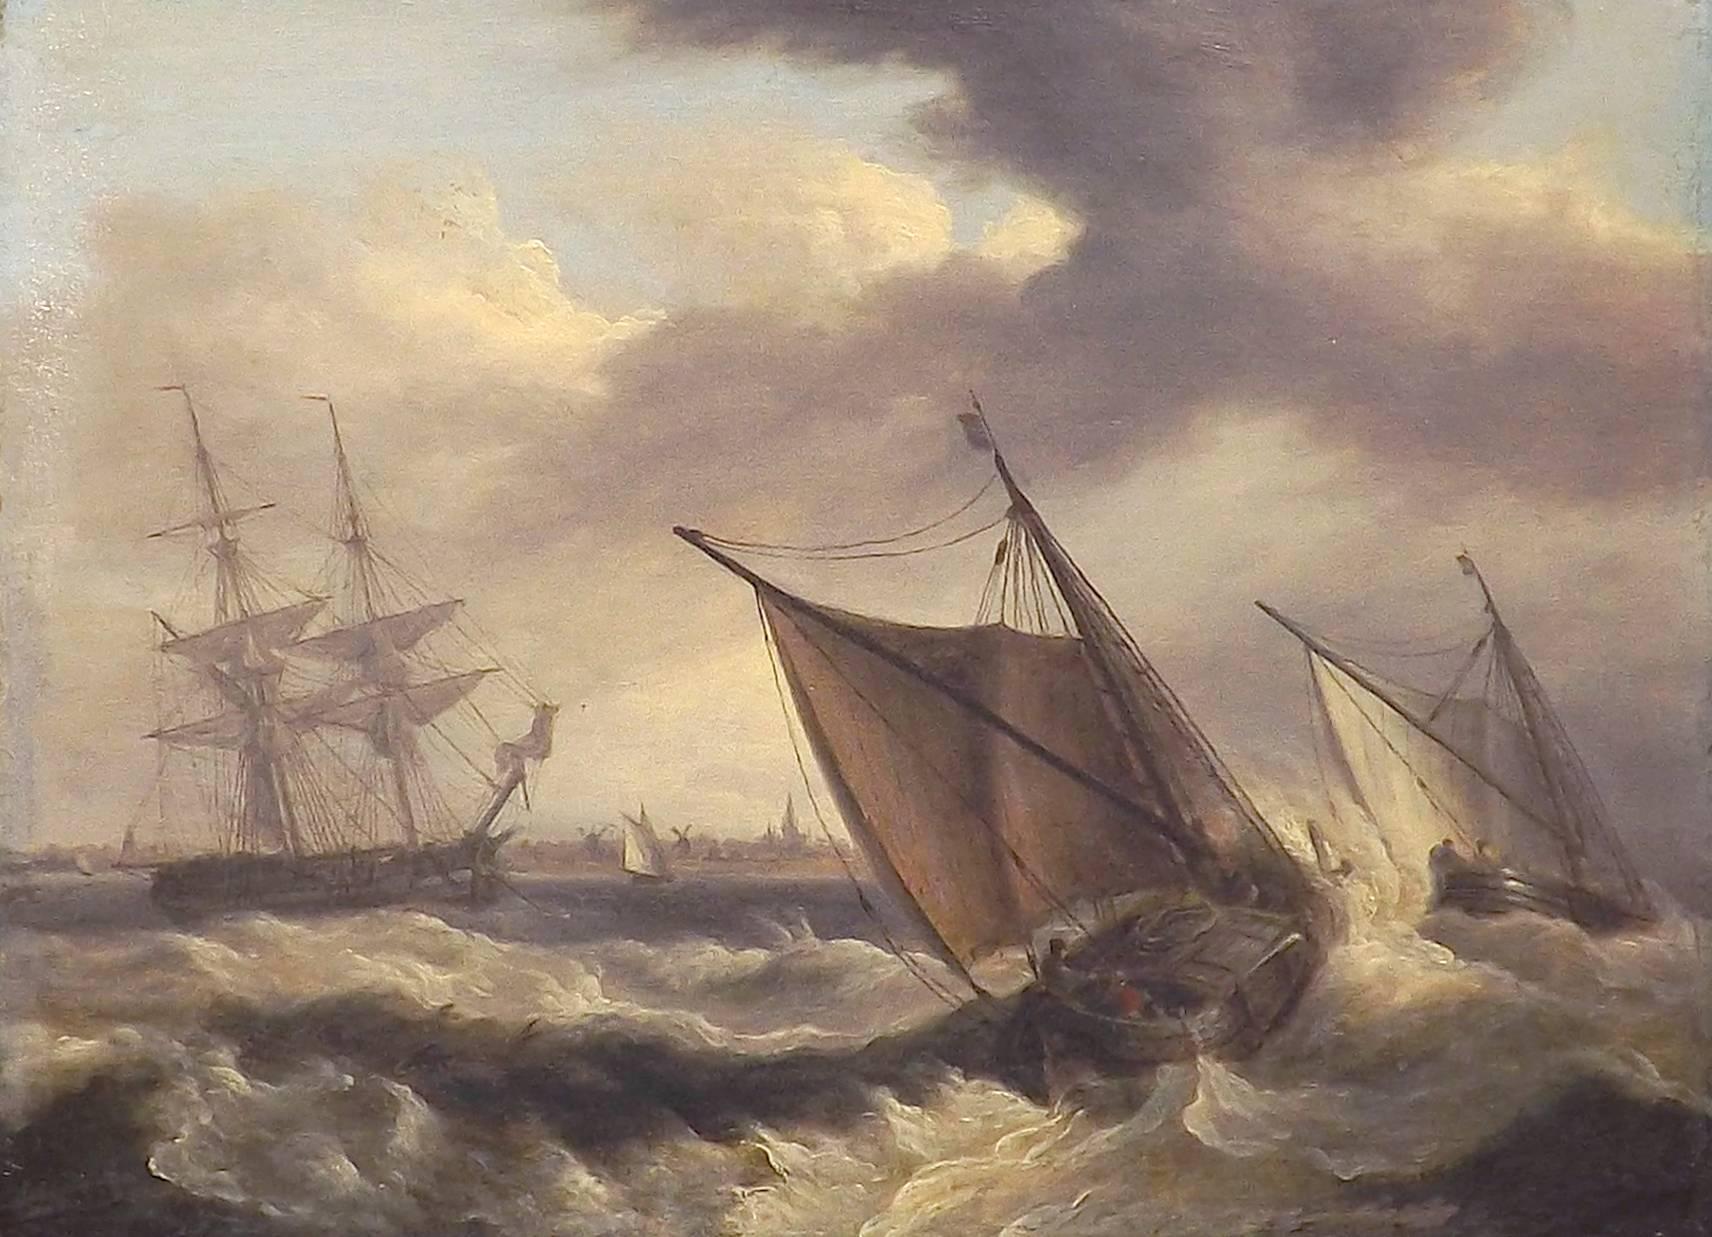 A fine antique painting of Dutch ships on the North Sea in rough weather by English artist Thomas Luny (1759-1837). A crew of a small fishing boat works hard fighting the billowing sails while another boat lies a few lengths ahead. A tall ship lies